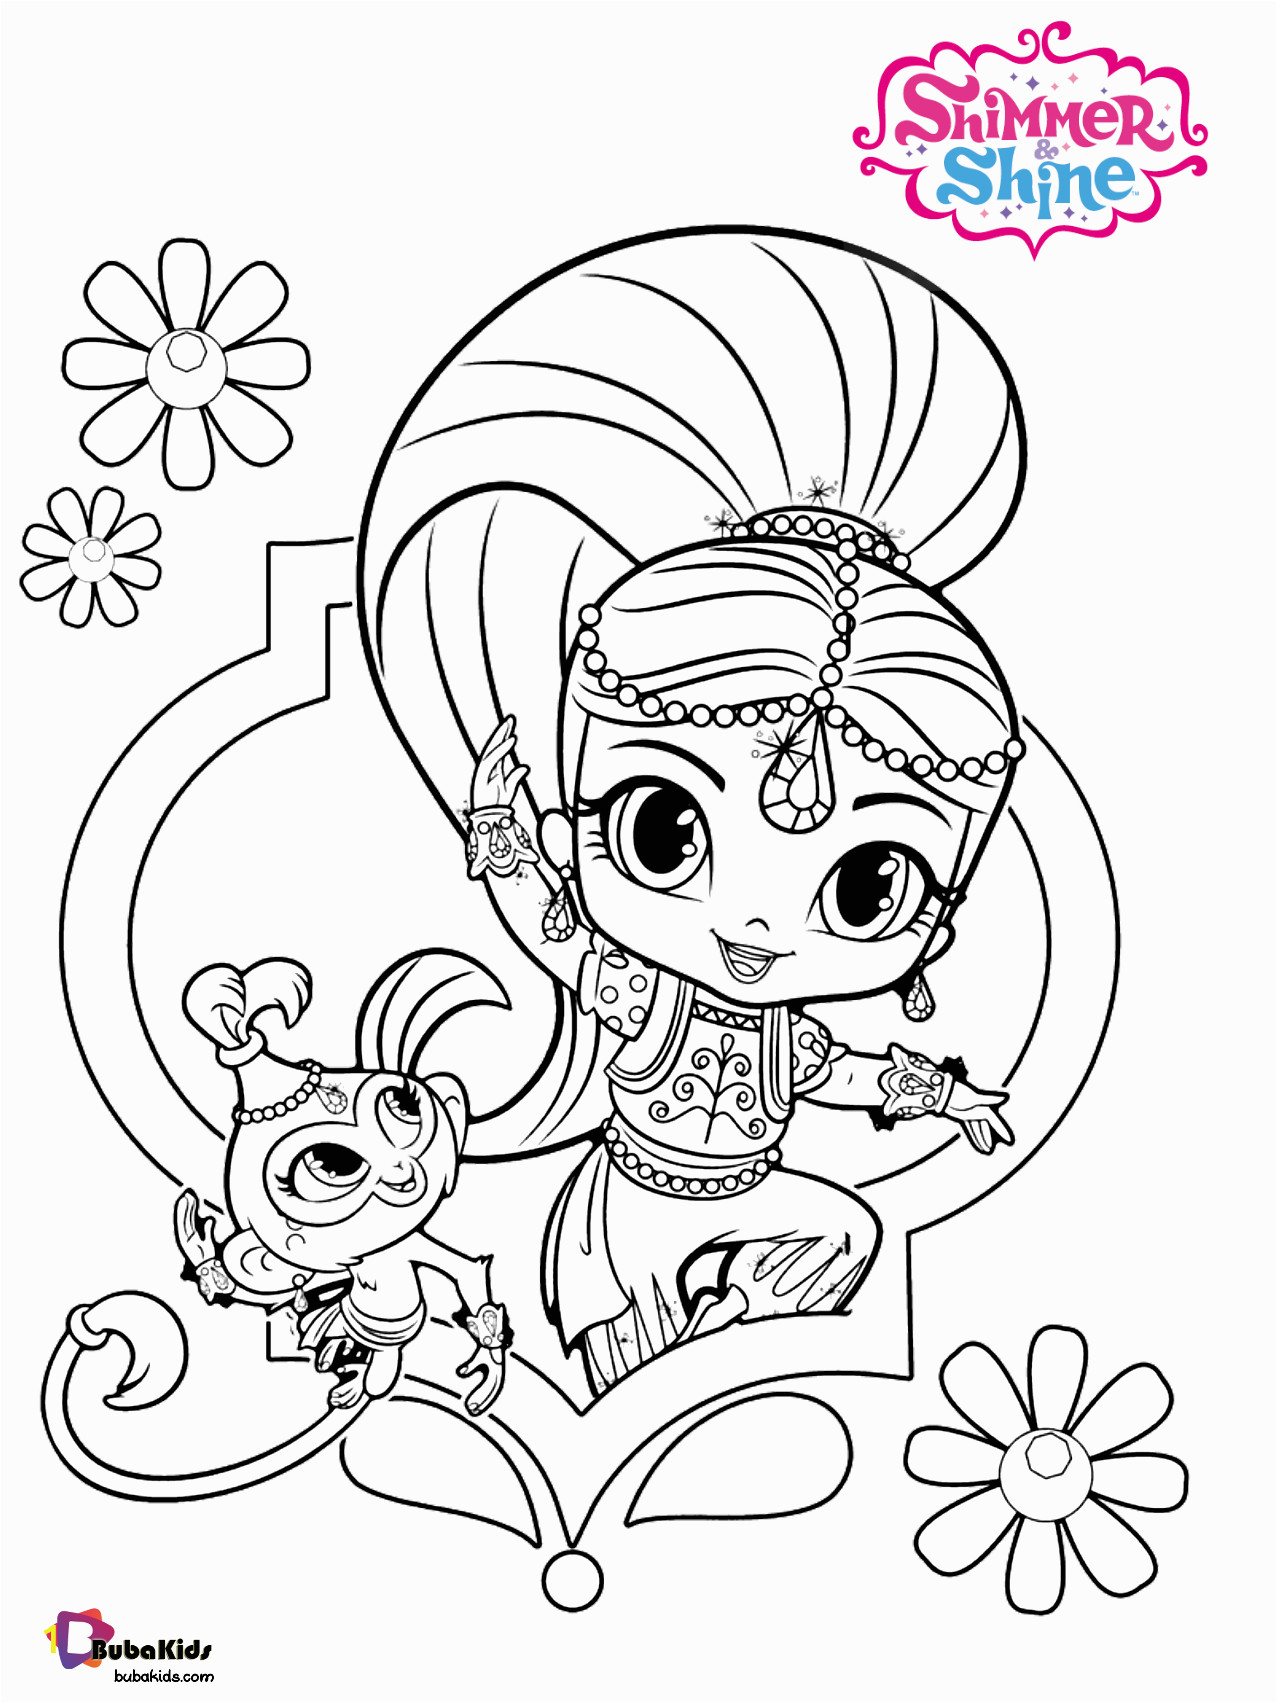 Nick Jr Shimmer and Shine Coloring Pages Nick Jr Shimmer and Shine Free and Printable